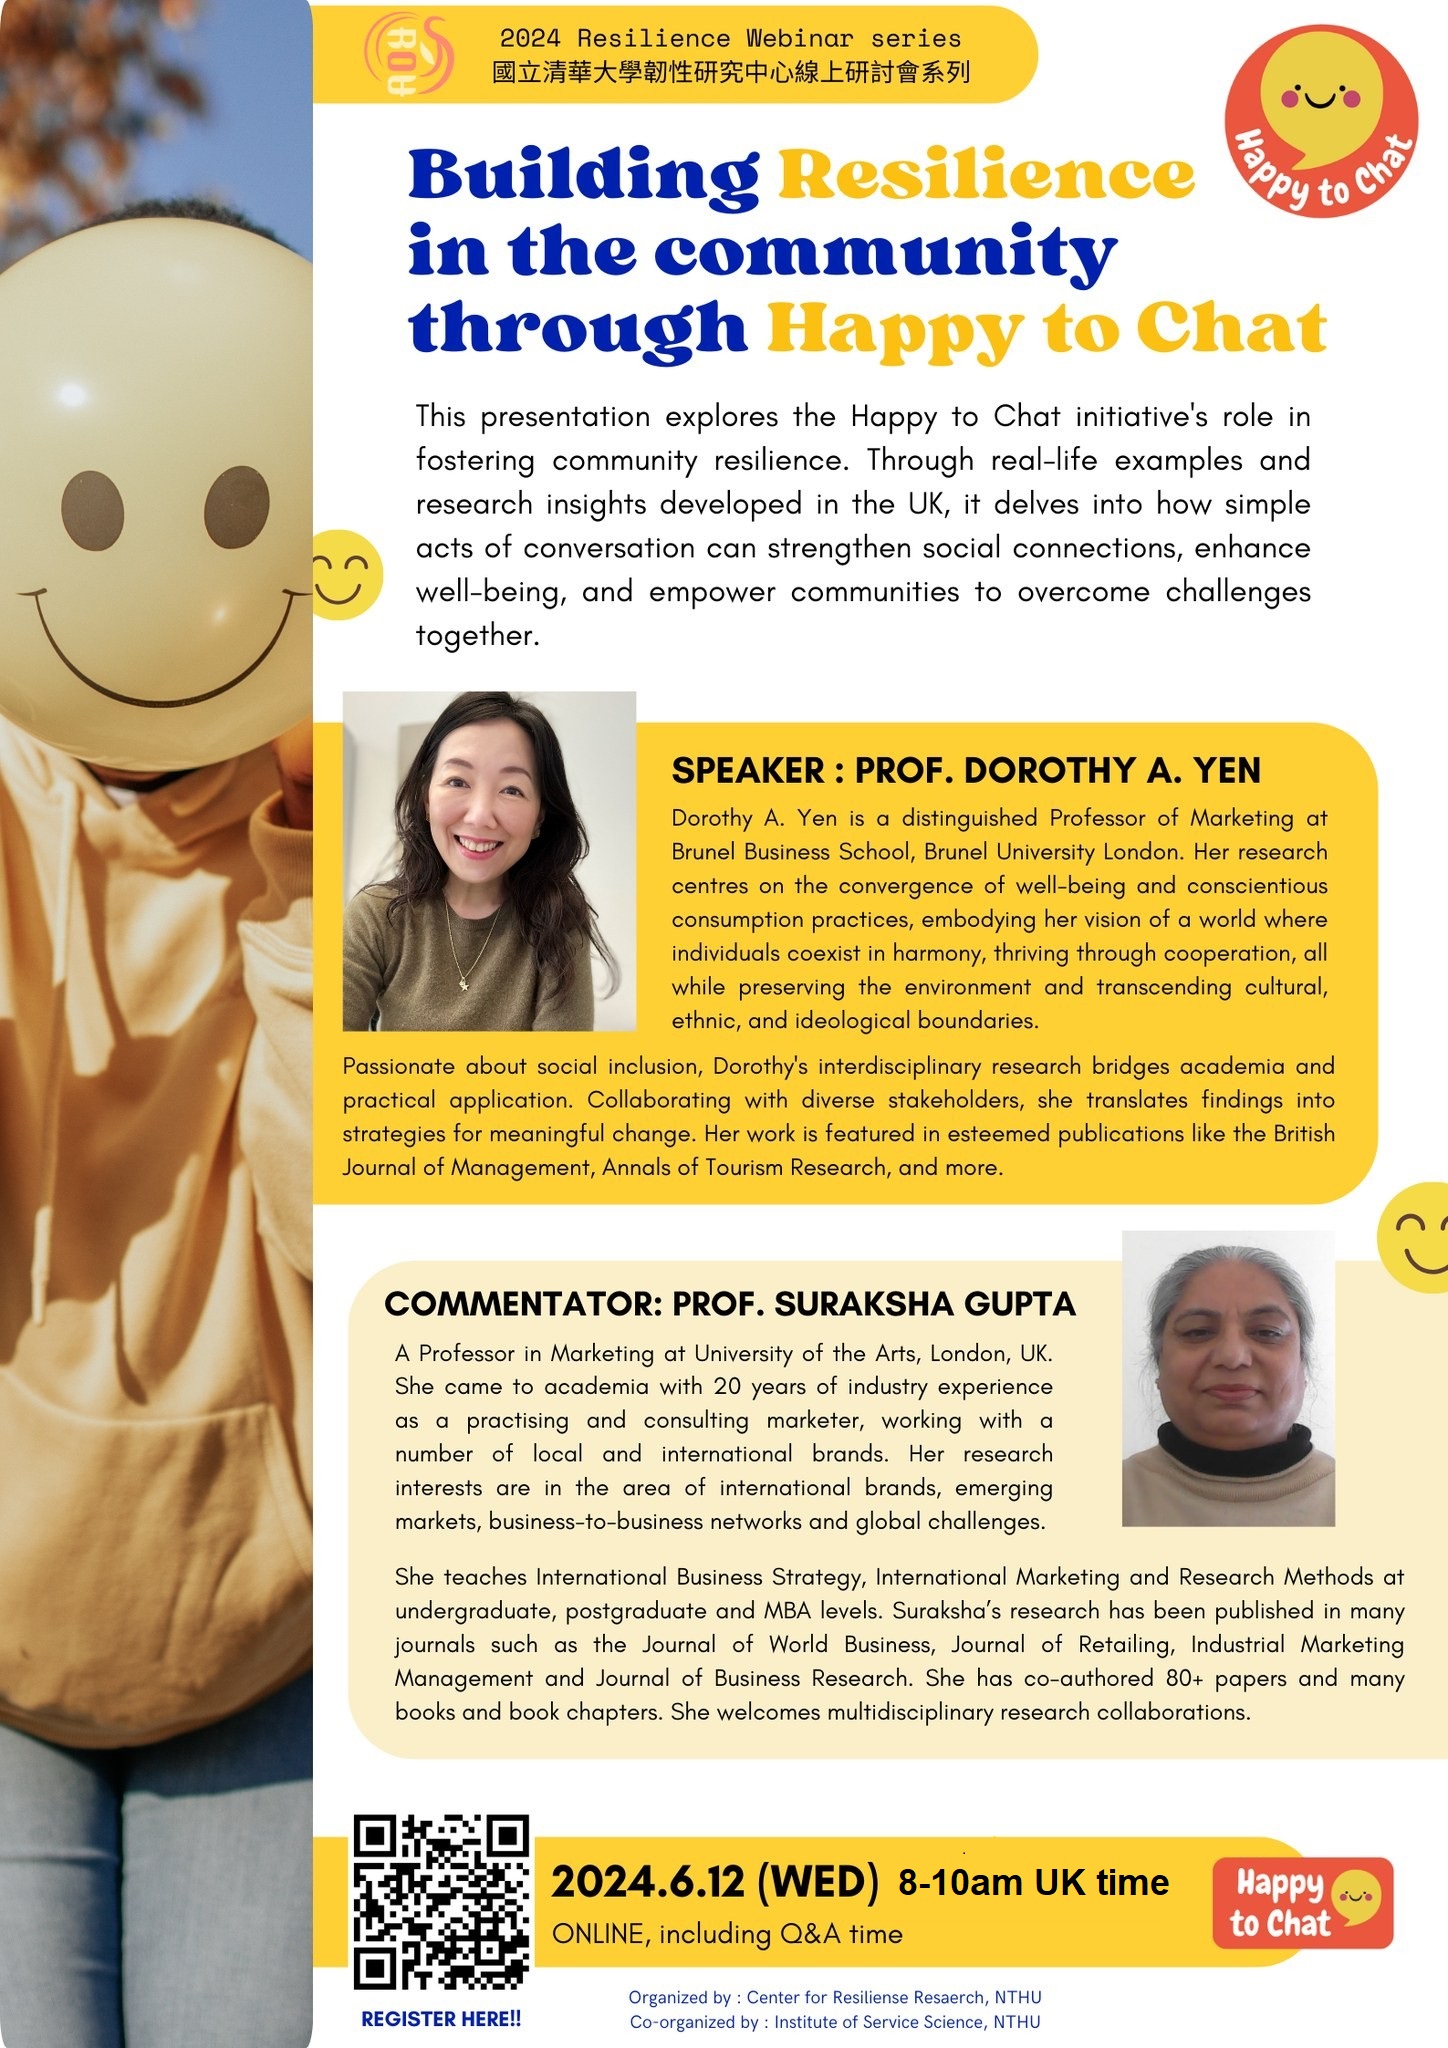 Building Resilience in Community through Happy to Chat